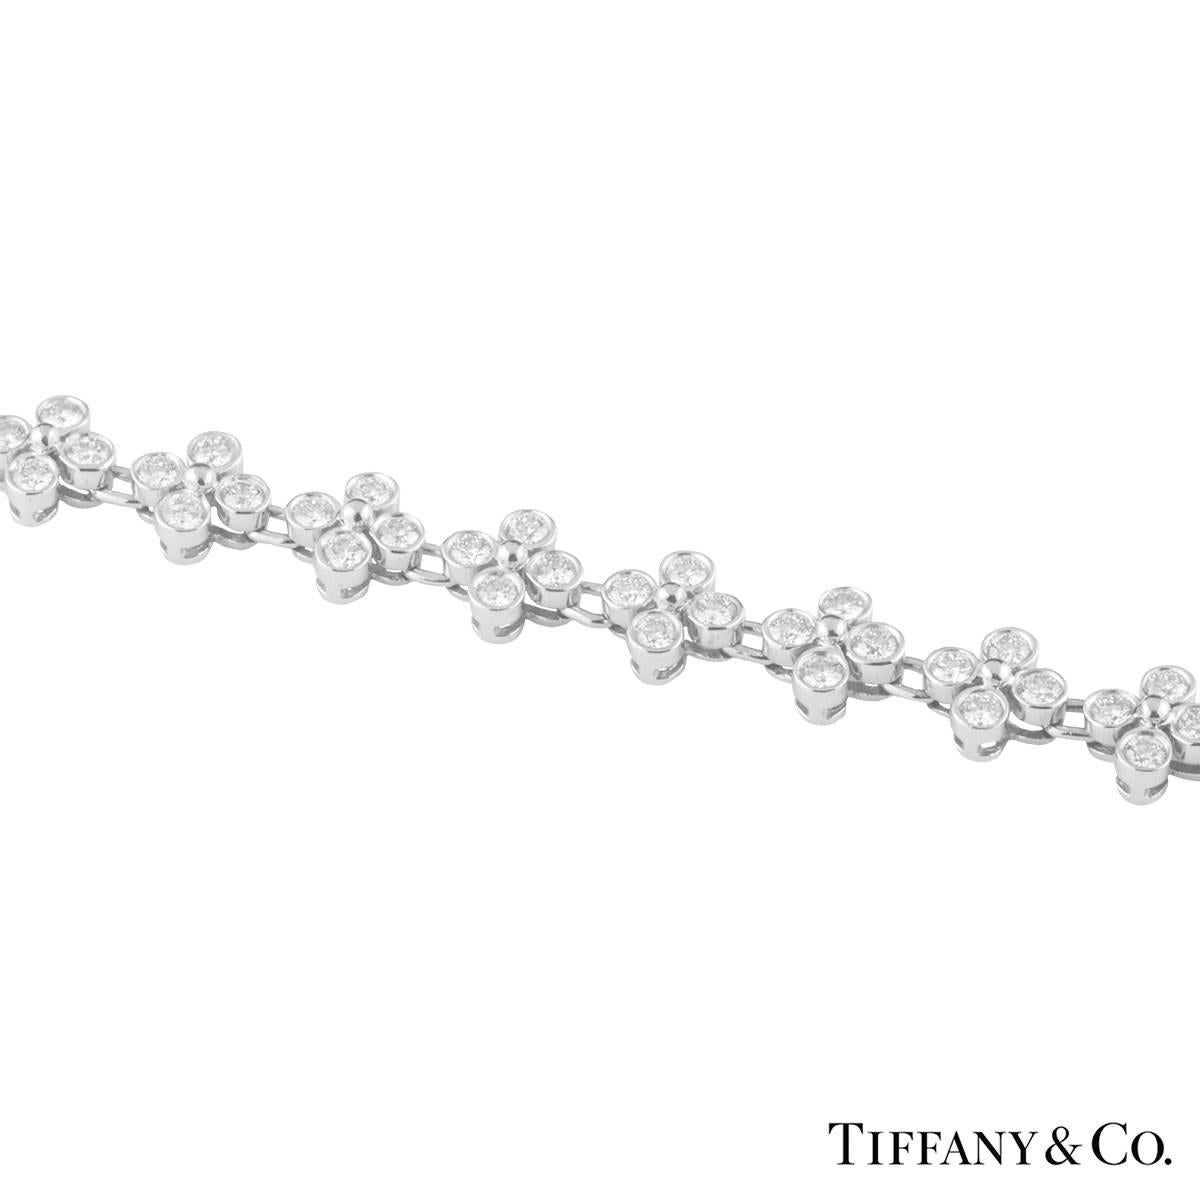 A stunning diamond bracelet in platinum from the Lace collection by Tiffany & Co. The bracelet features 27 quatrefoil flower motifs, each containing 4 round brilliant cut diamonds. The diamonds have a total carat weight of approximately 3.21ct, F+